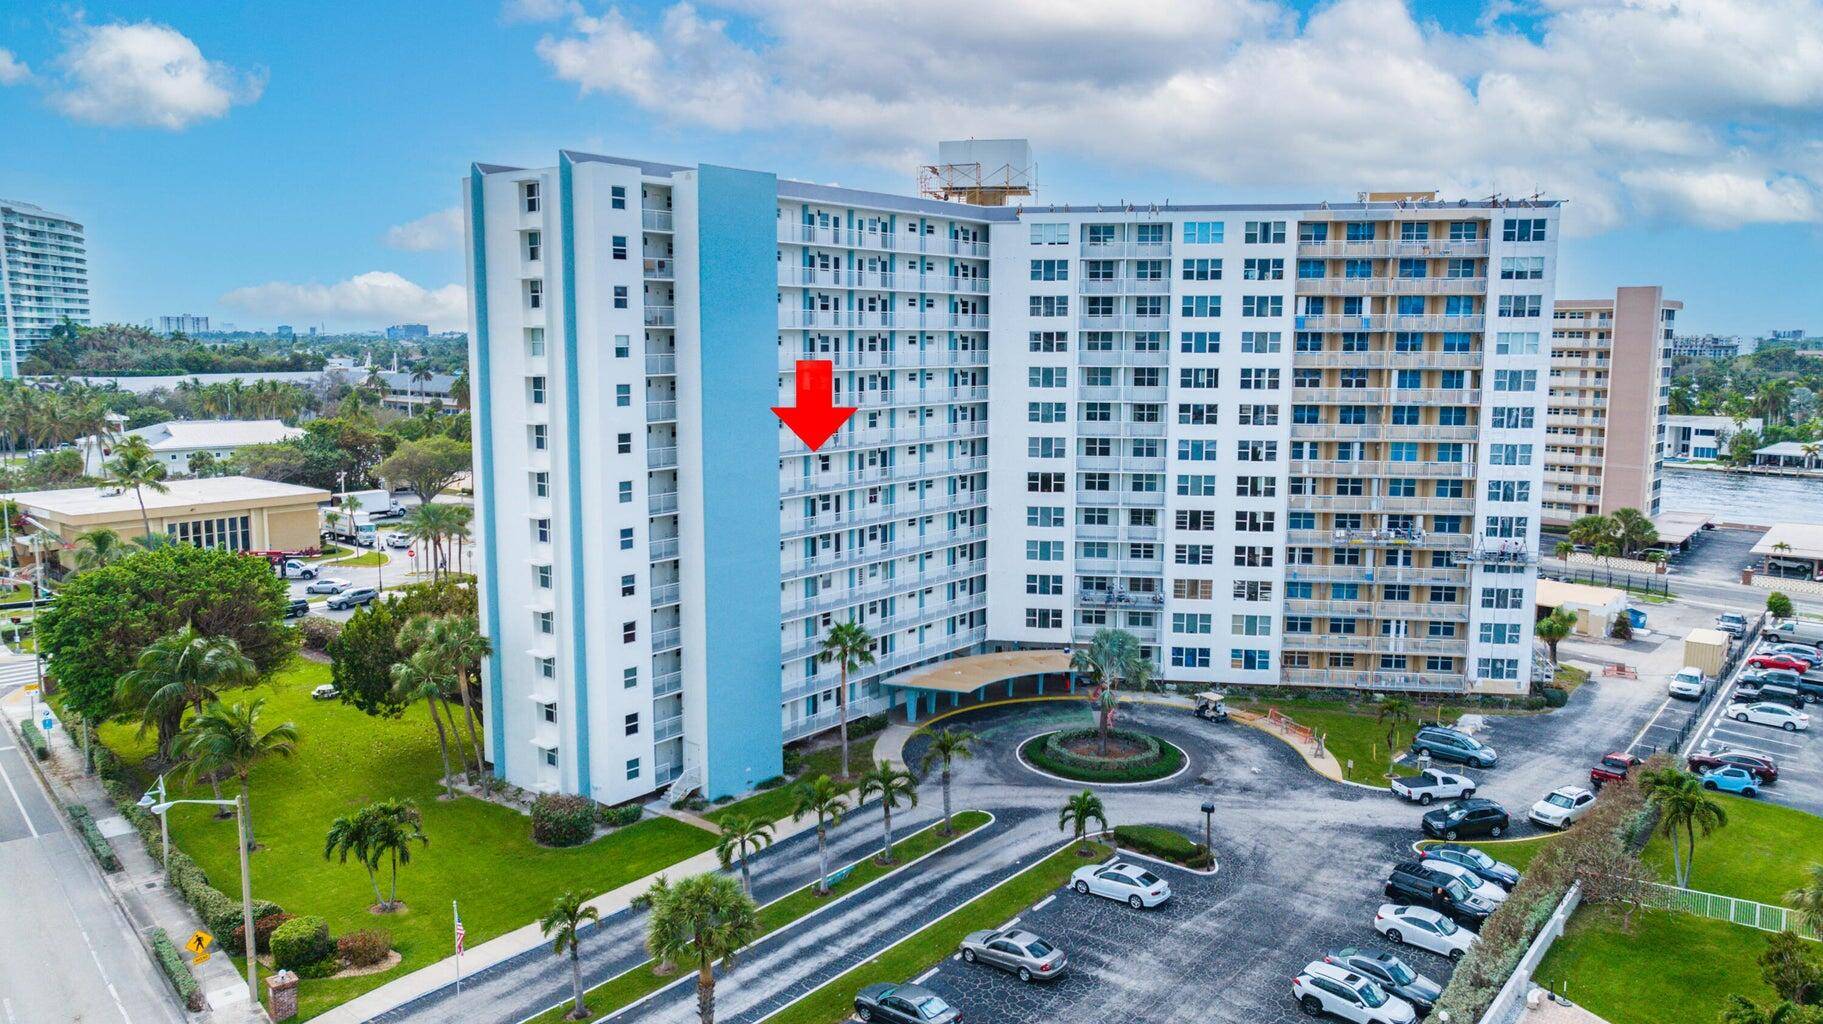 Come see this beautiful turnkey 2 bedroom 2 full bath furnished condo right across the street from Pompano Beach Pier.